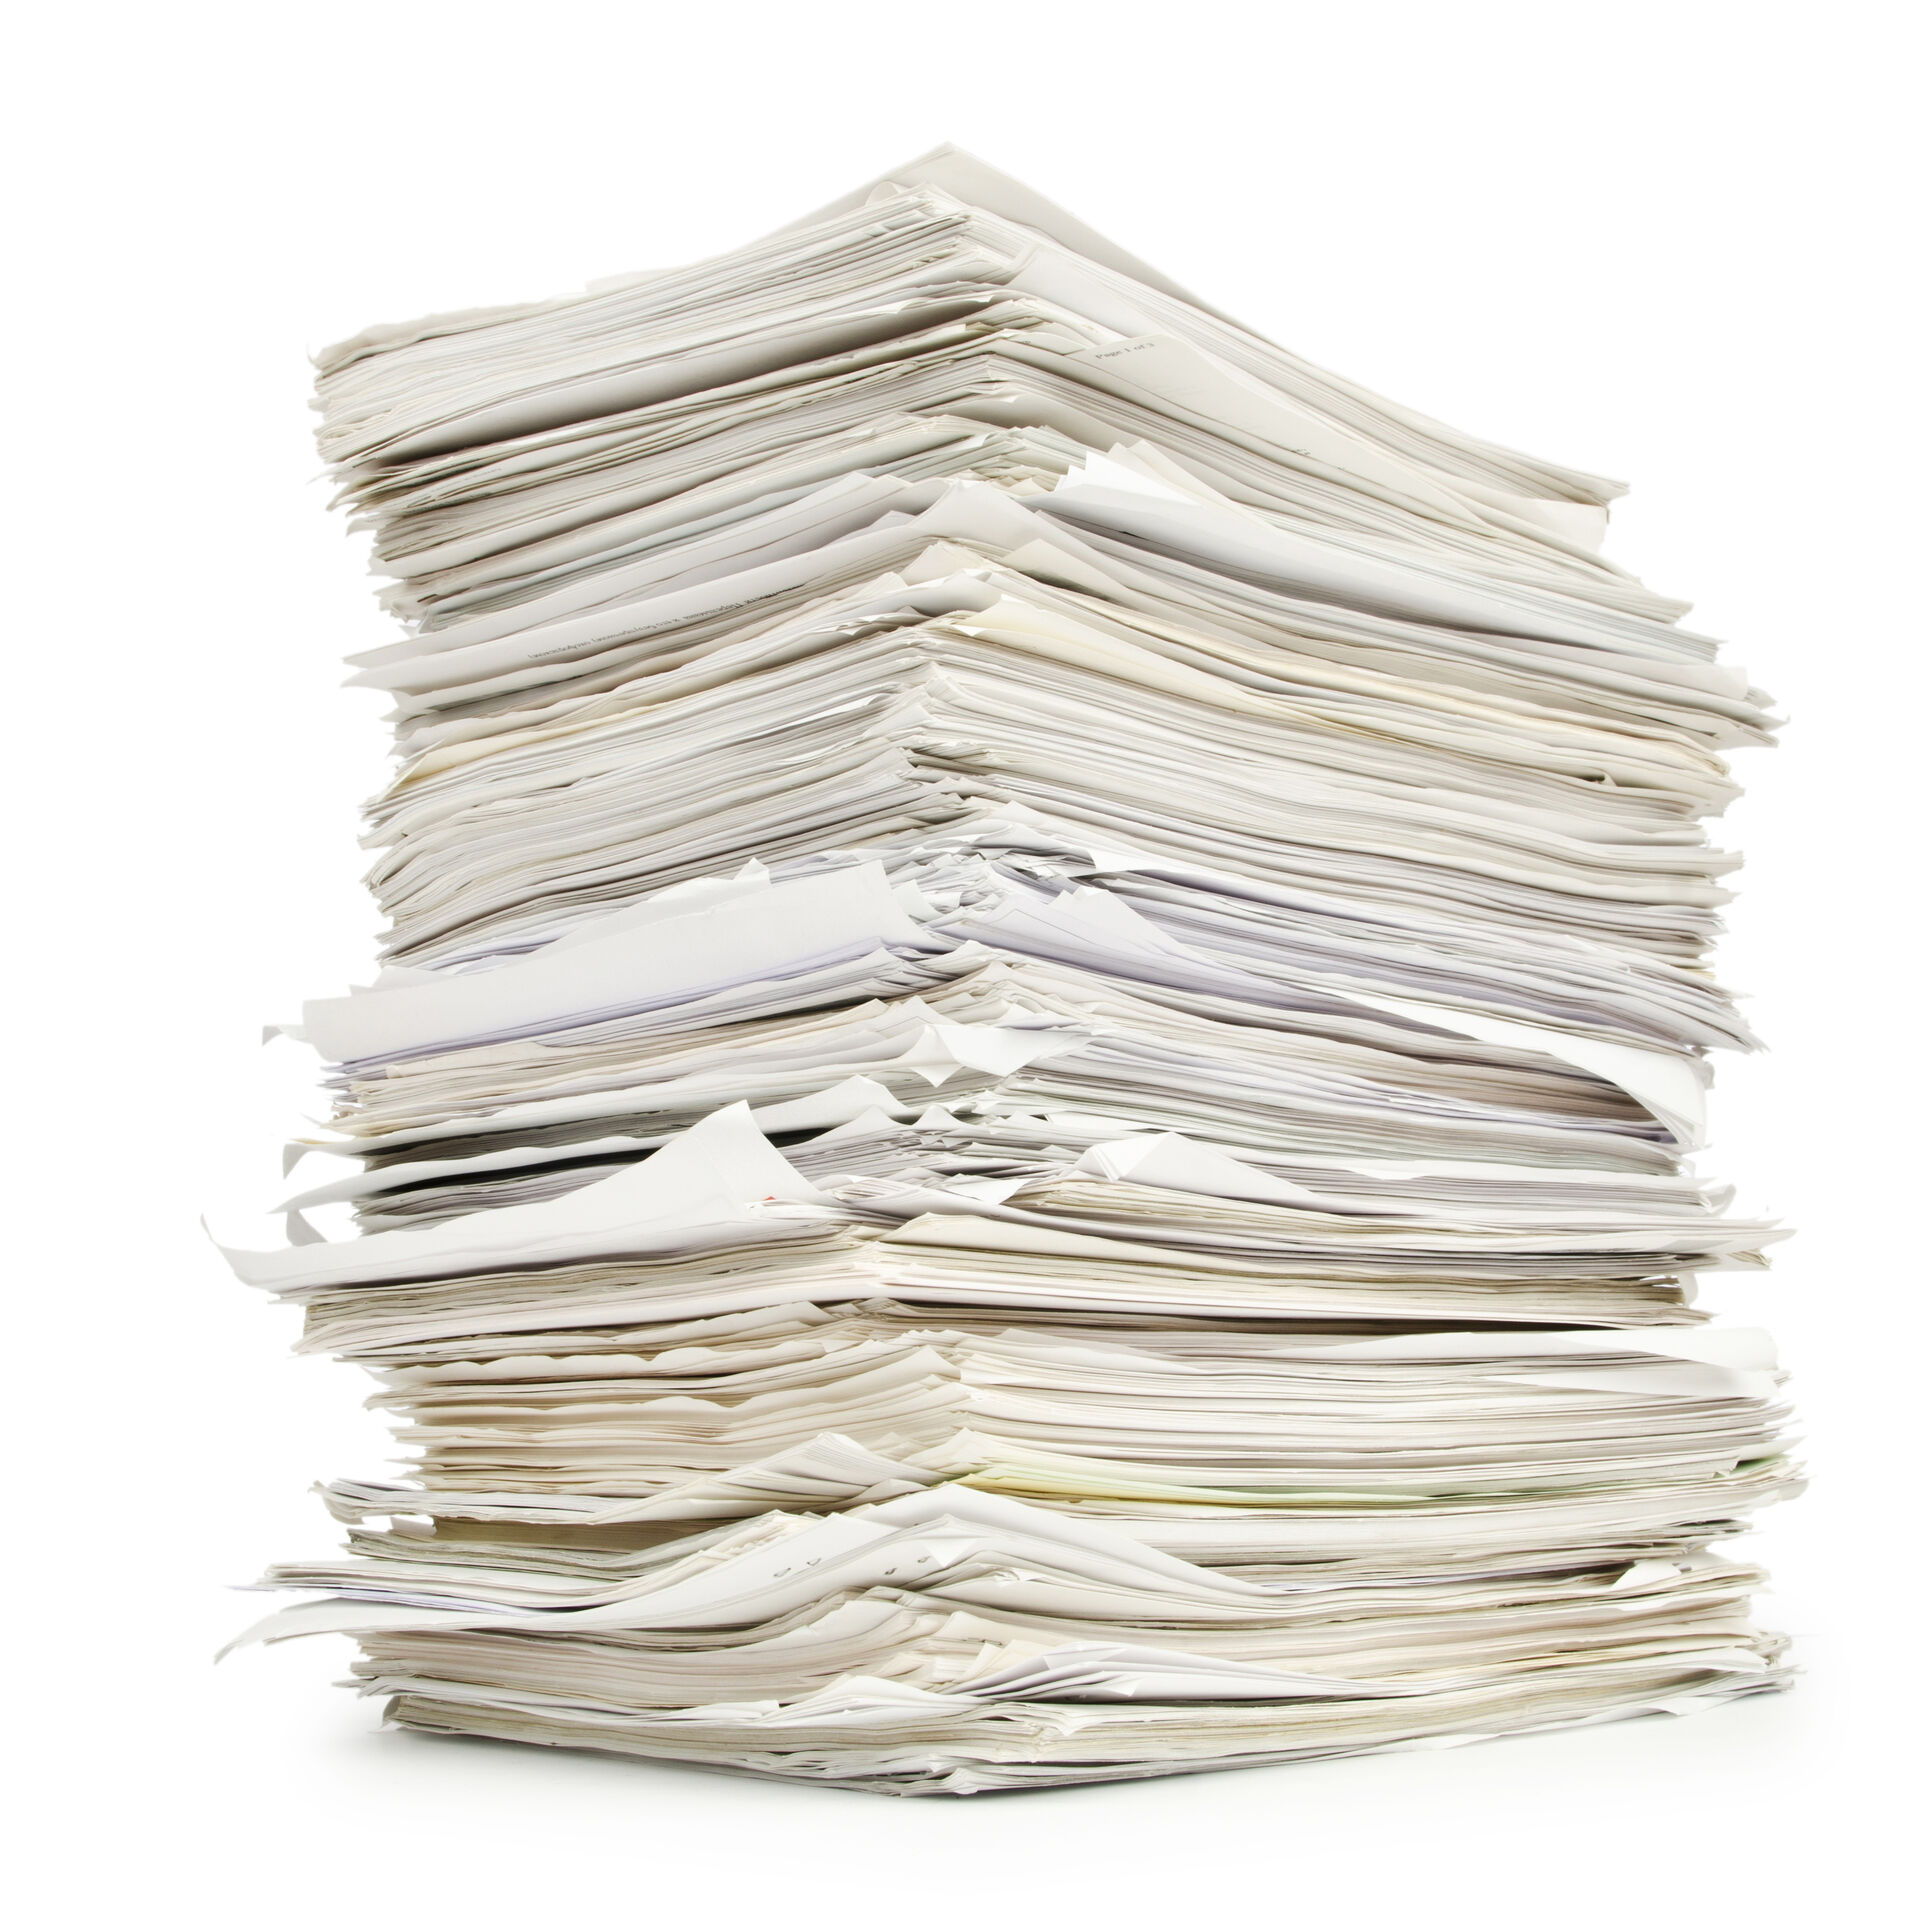 Image showing a pile of papers